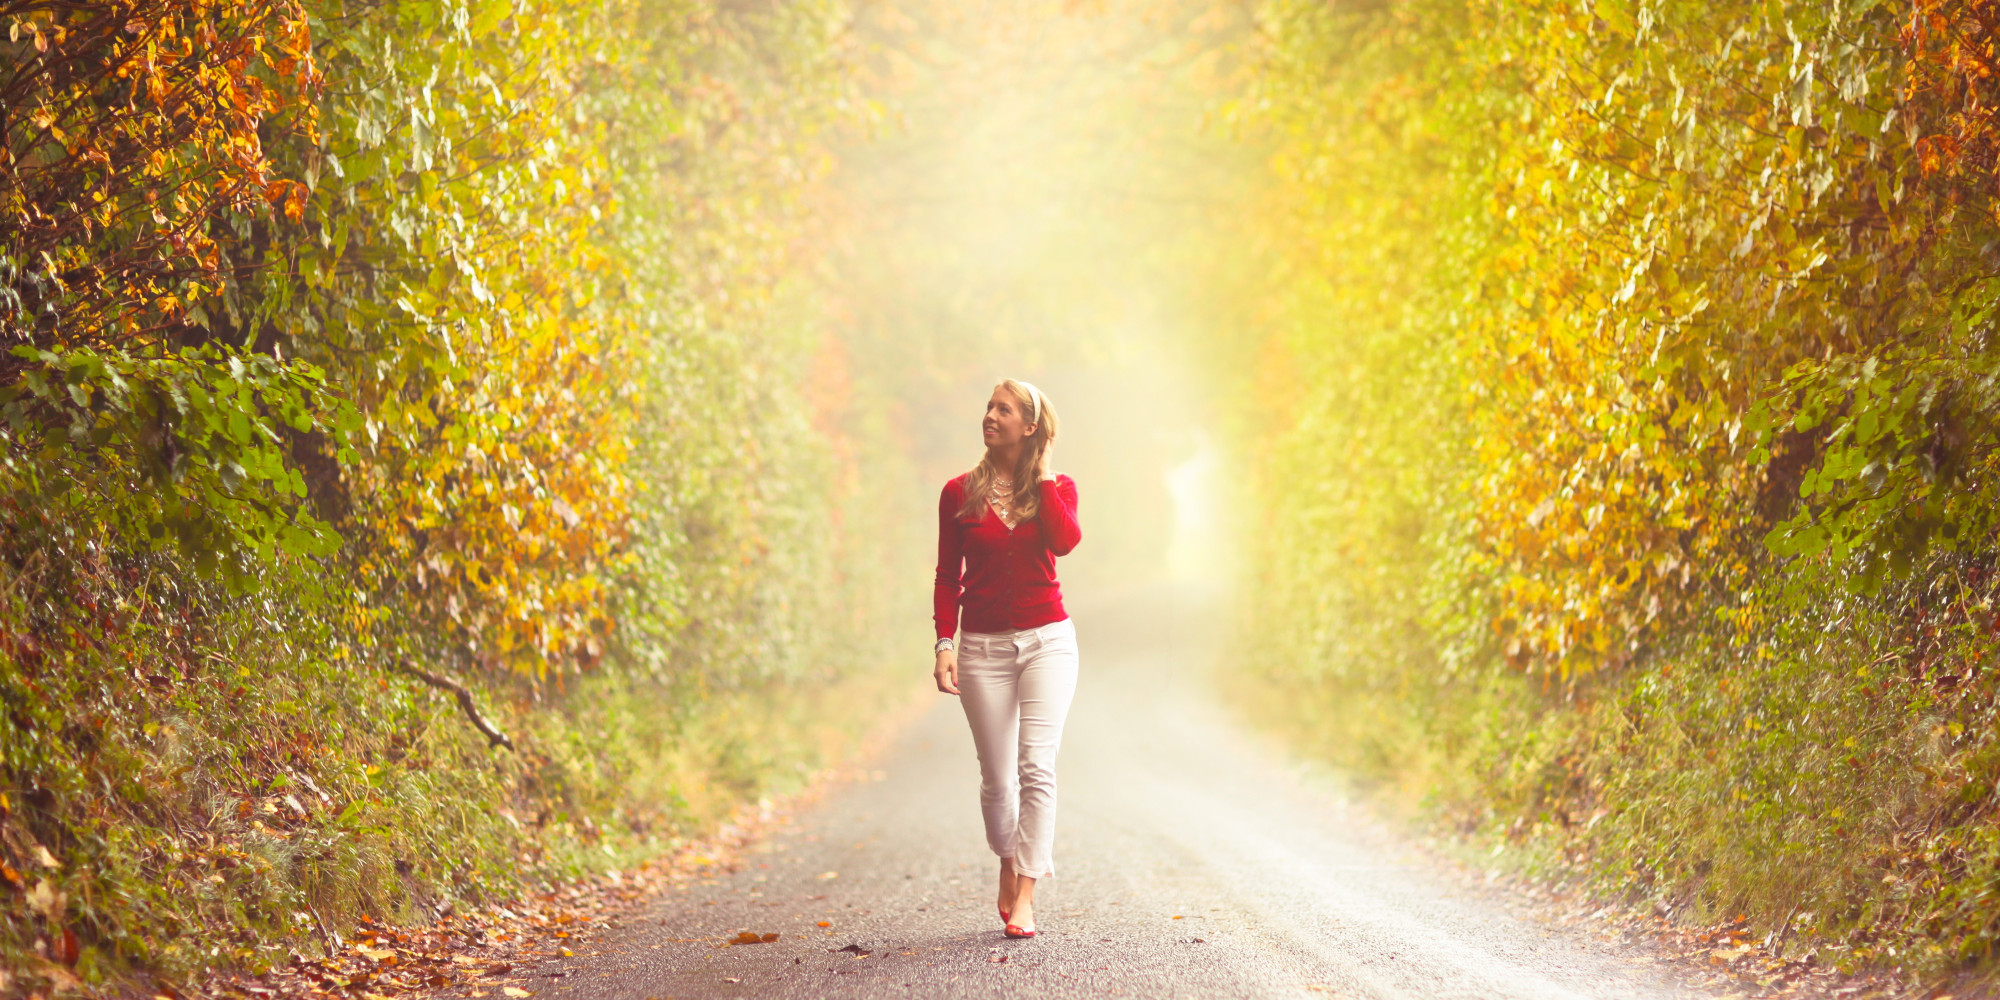 Girl walking in country road in the autumn fog